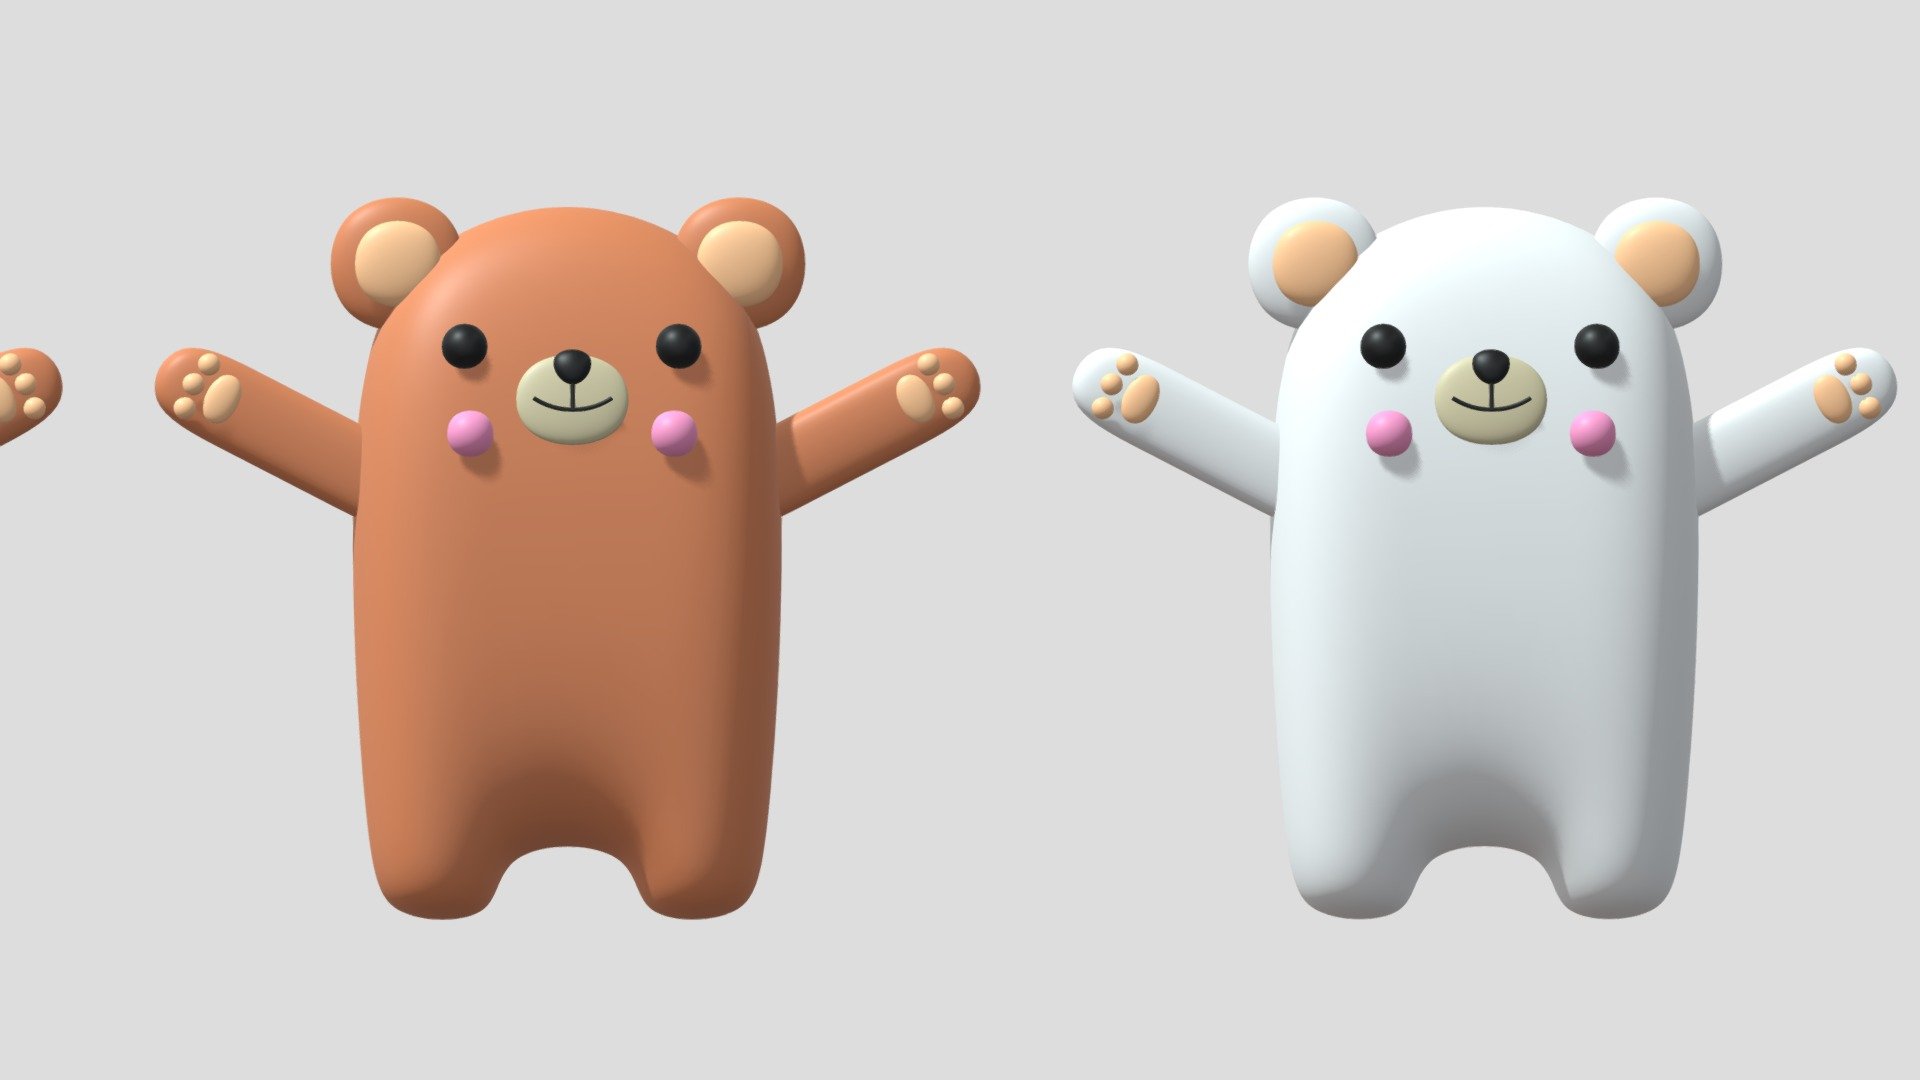 -Cartoon Cute Bear.

-This product contains 92 objects.

-Mid Poly : Verts : 12,306 Faces : 12,276.

-High Poly : Verts : 24,690 Faces : 24,660.

-Materials have the correct names.

-This product was created in Blender 2.935.

-Formats: blend, fbx, obj, c4d, dae, abc, stl, glb, unity.

-We hope you enjoy this model.

-Thank you 3d model